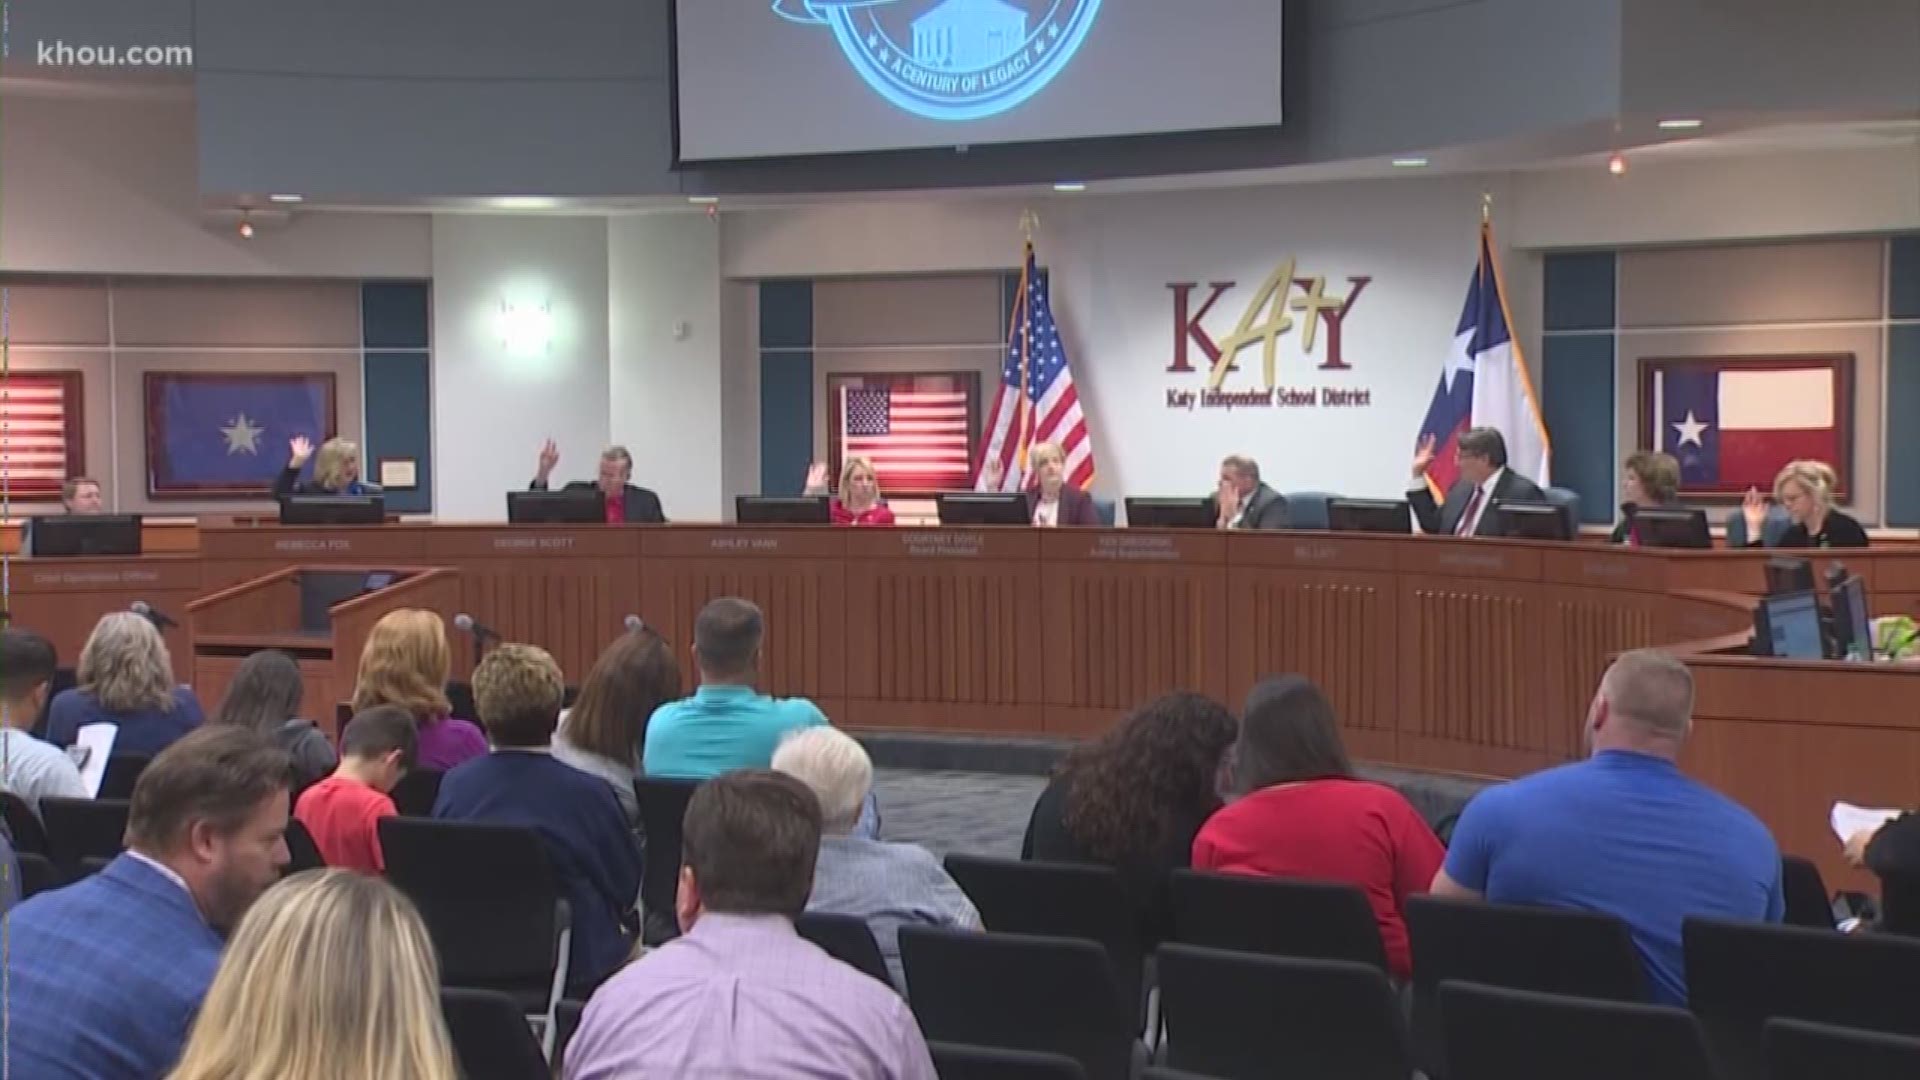 Big changes happening in Katy. Some students will have to go to different schools next year due to a new rezoning plan. And the board names acting superintendent Ken Gregorski the lone finalist for the job.